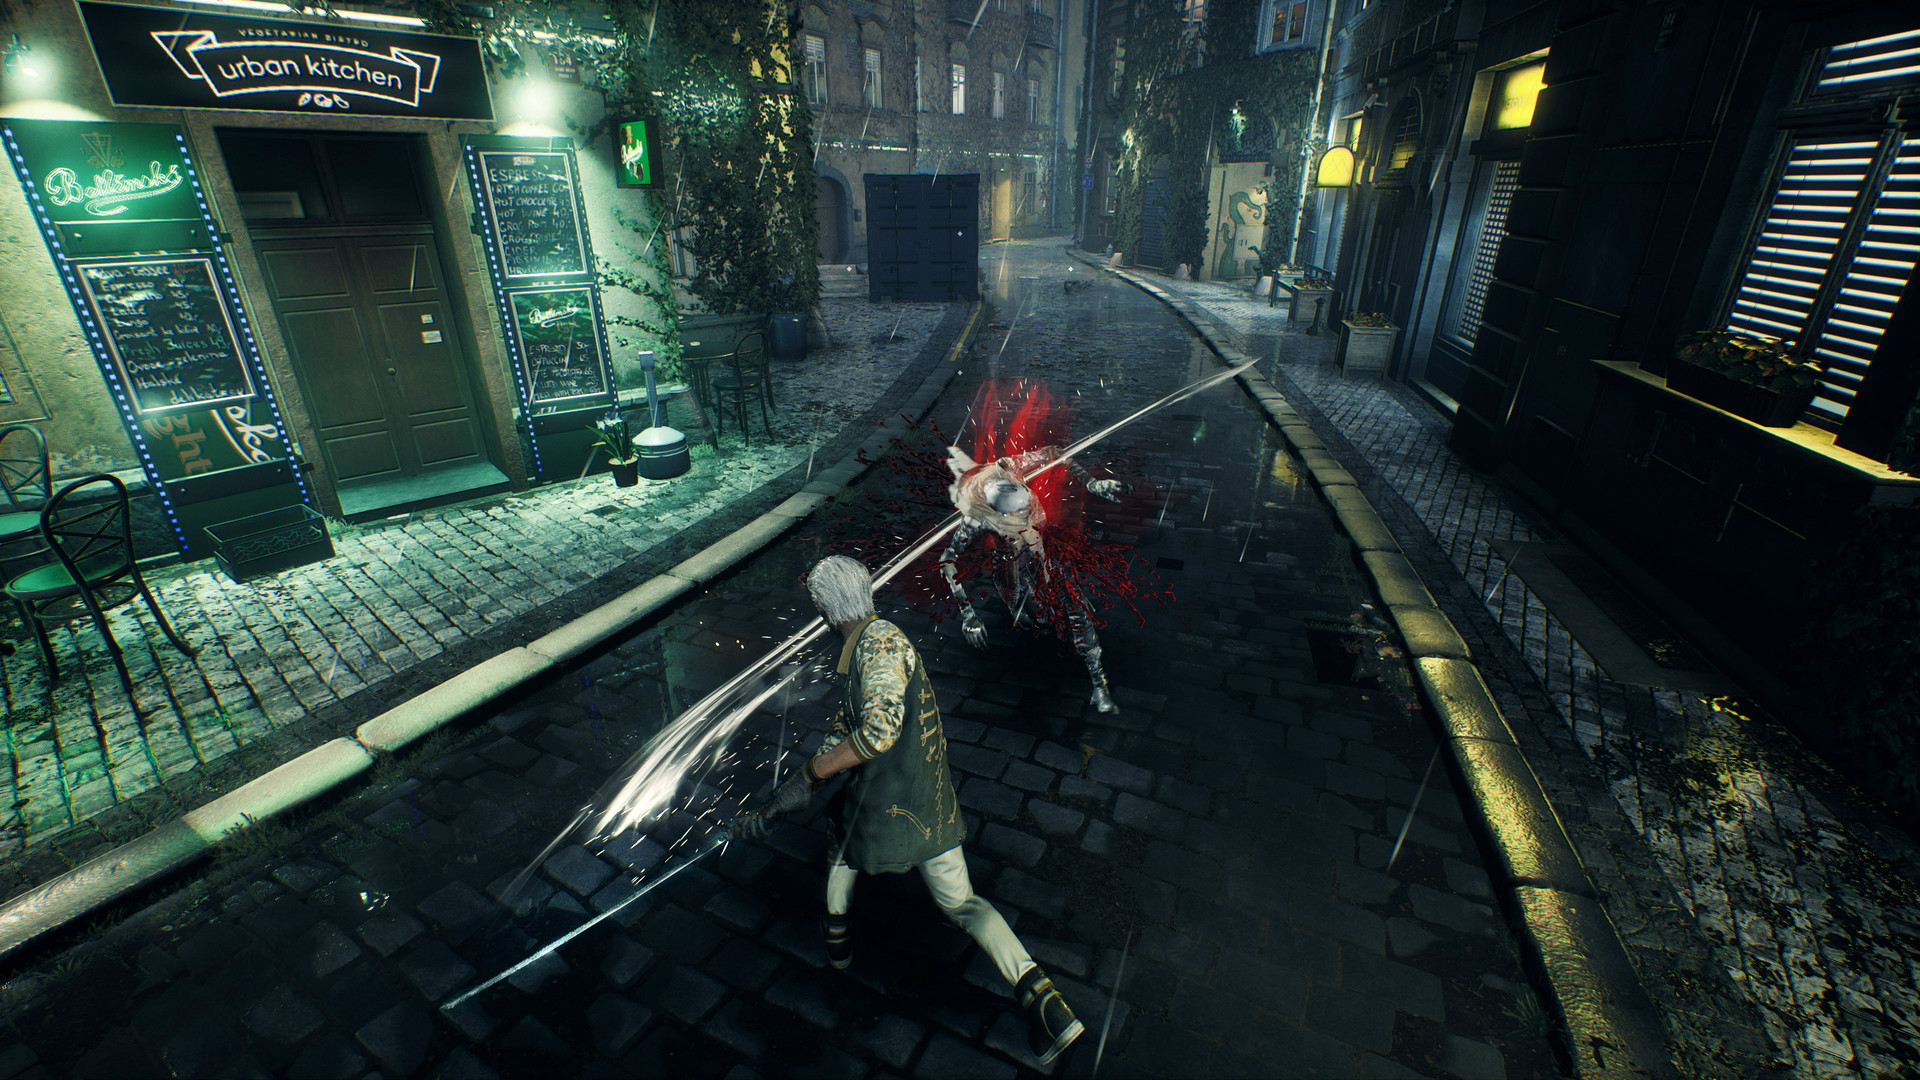 Vampire: The Masquerade battle royale Bloodhunt fully launches in